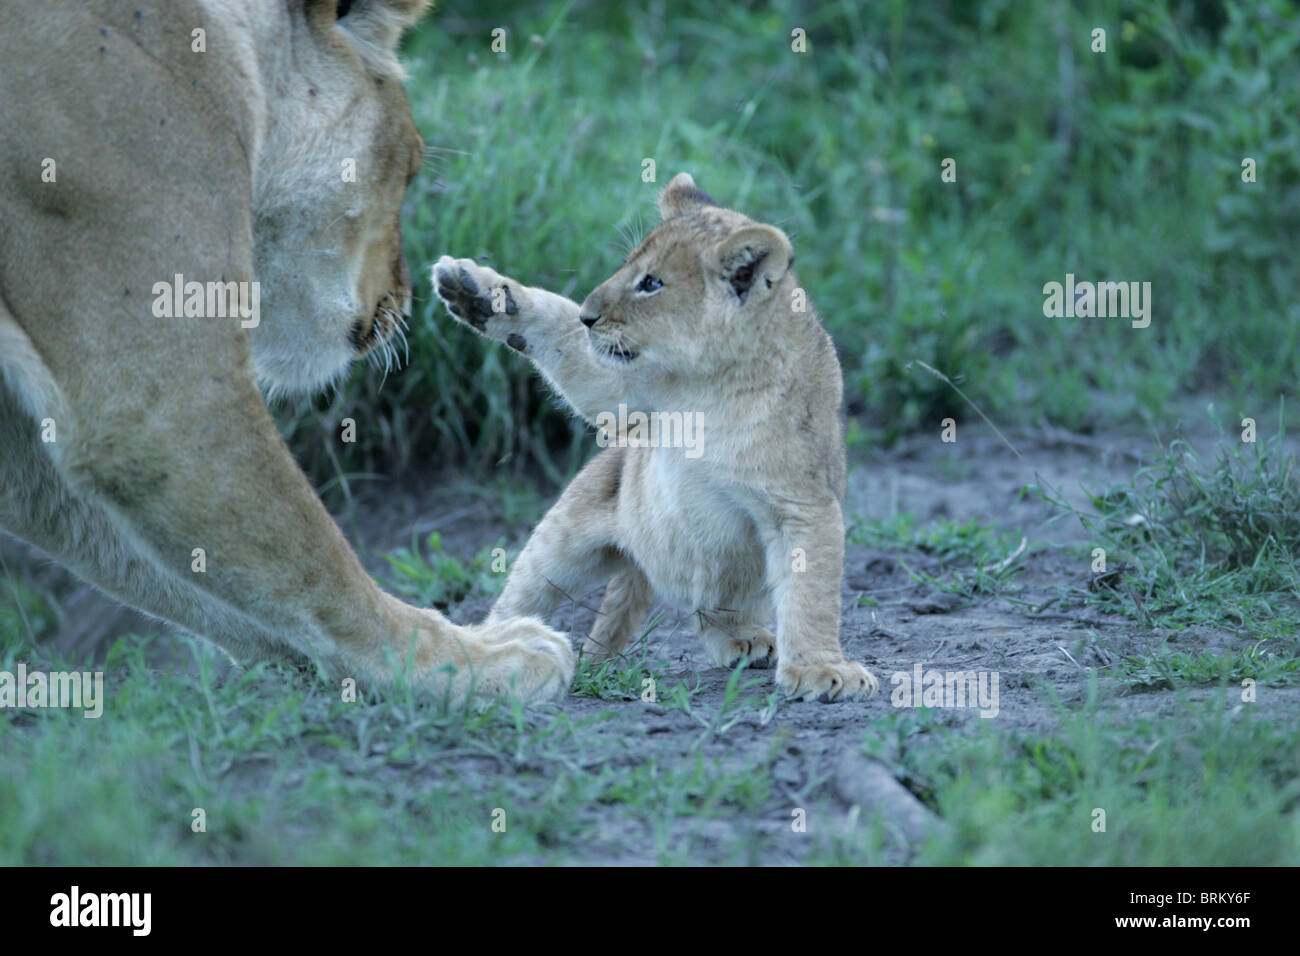 A lioness and a cub trying to touch her face Stock Photo